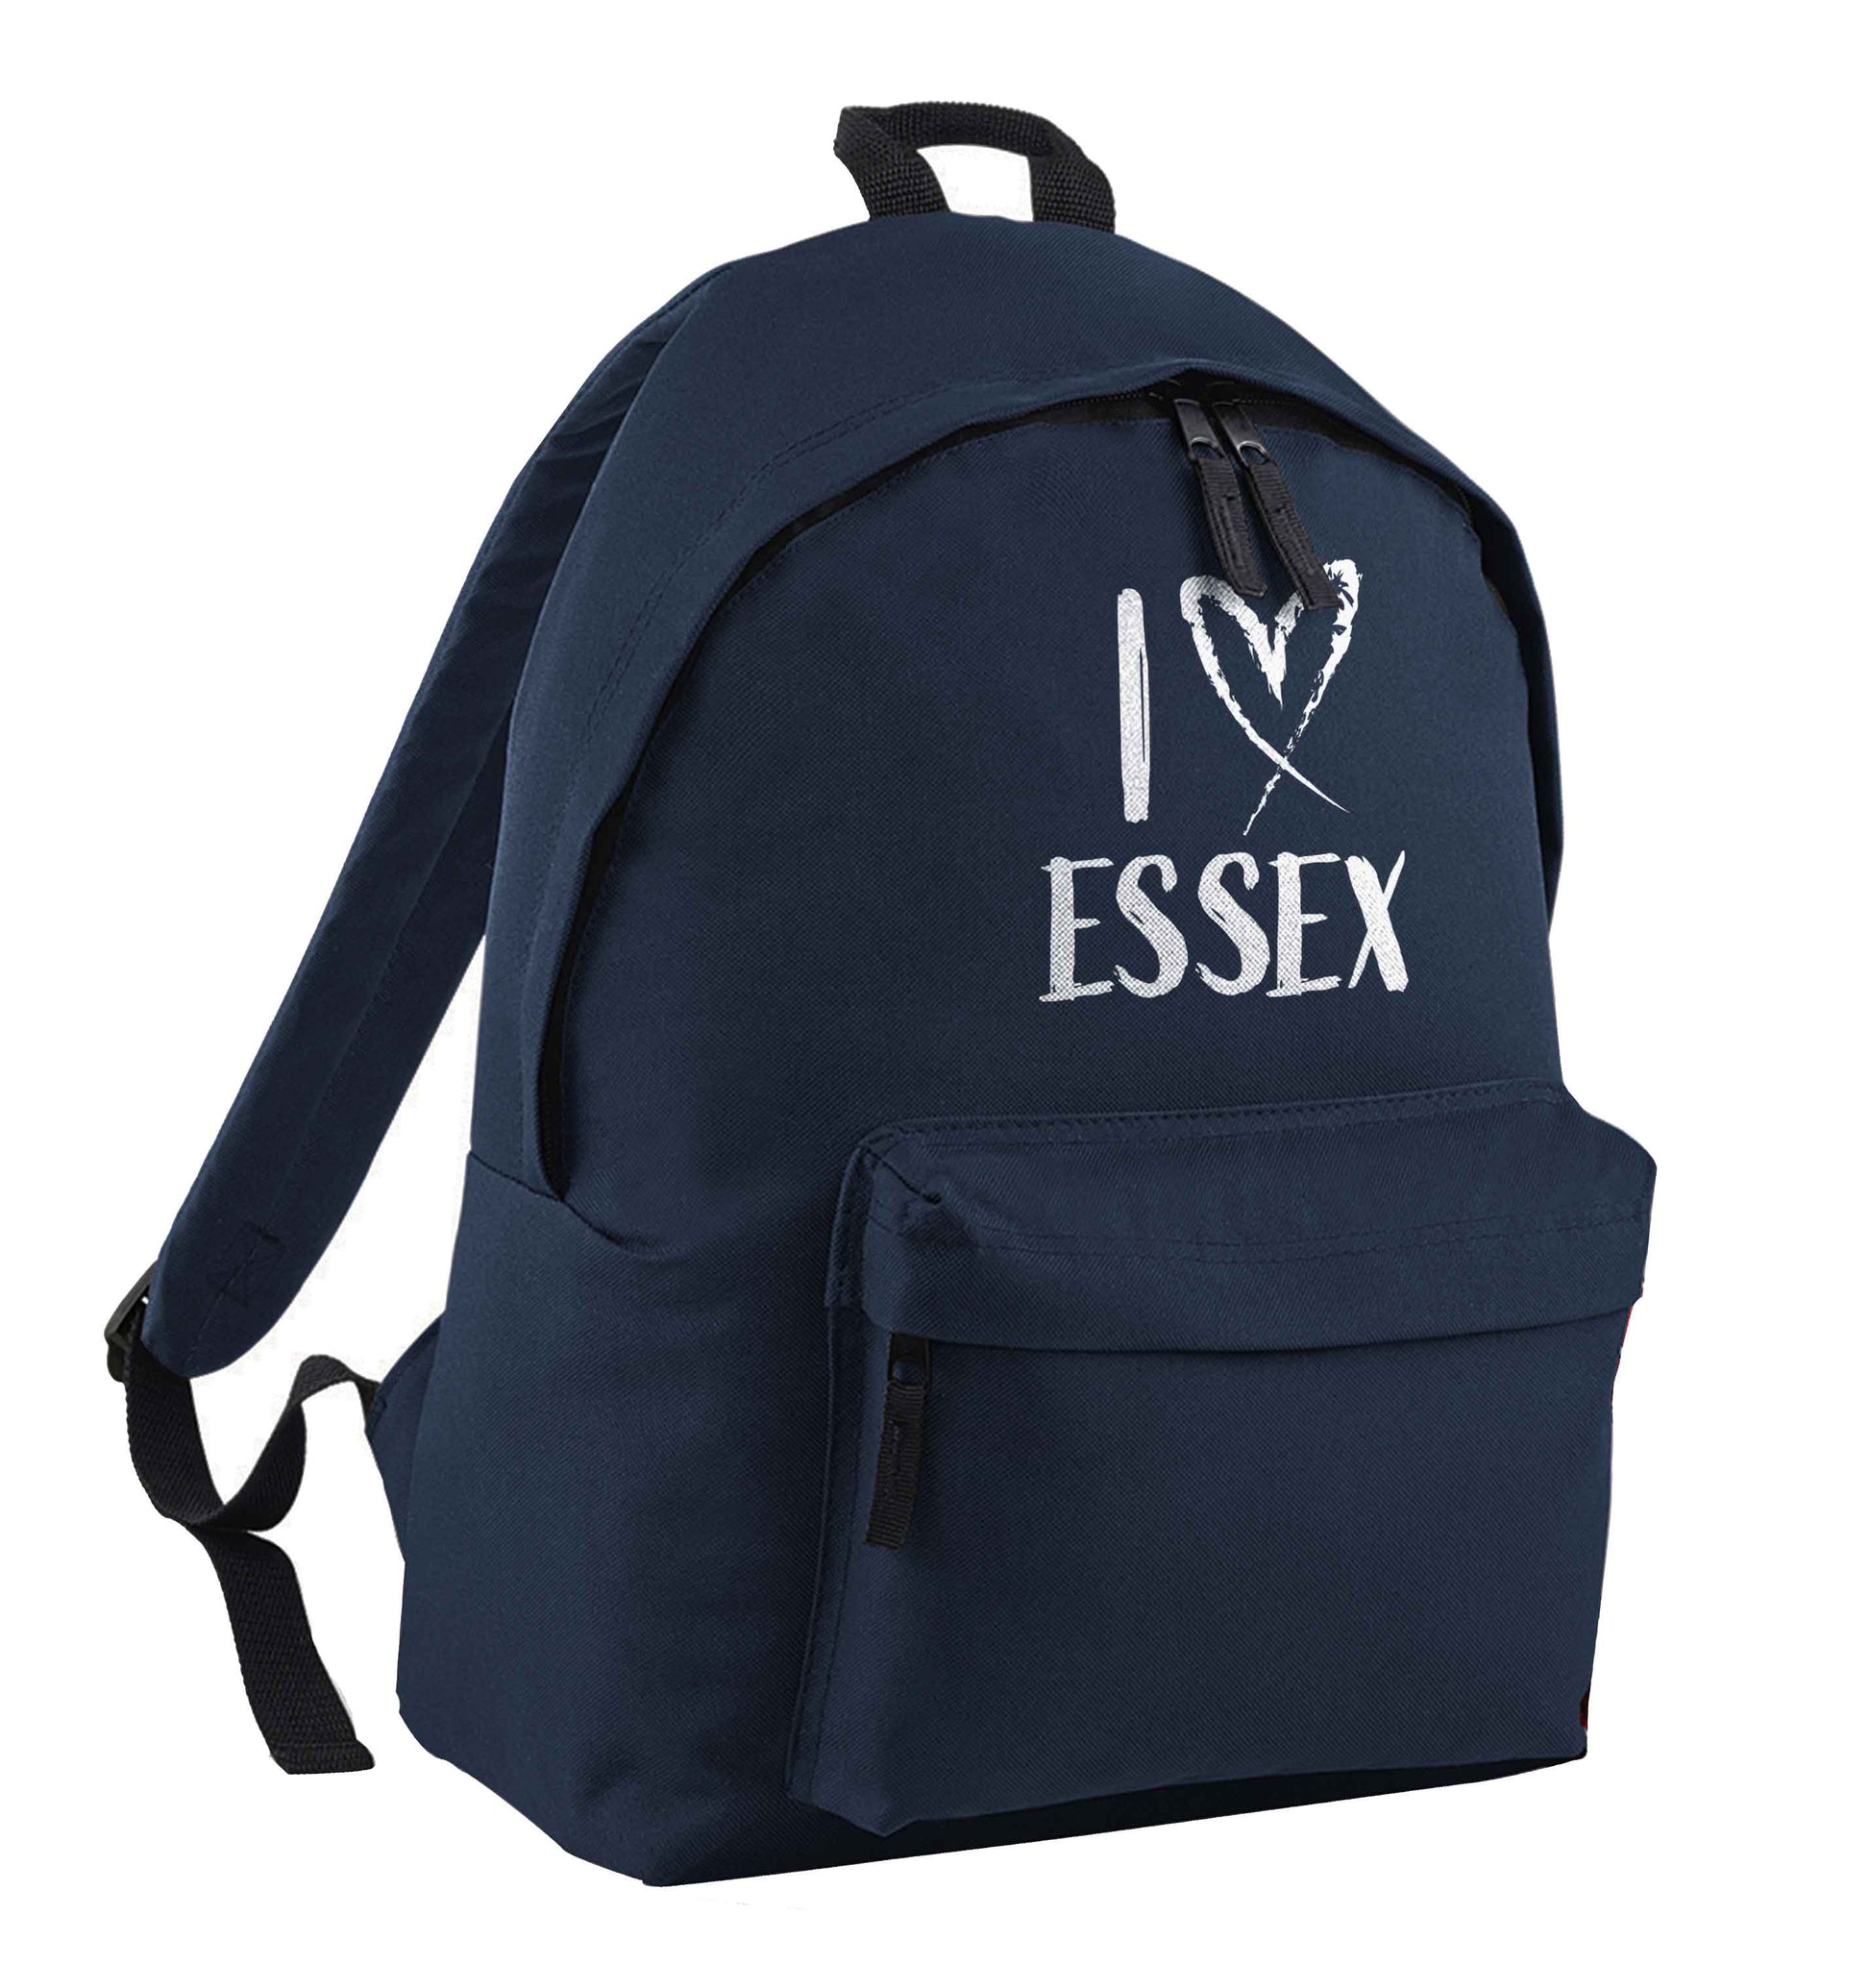 I love Essex navy adults backpack